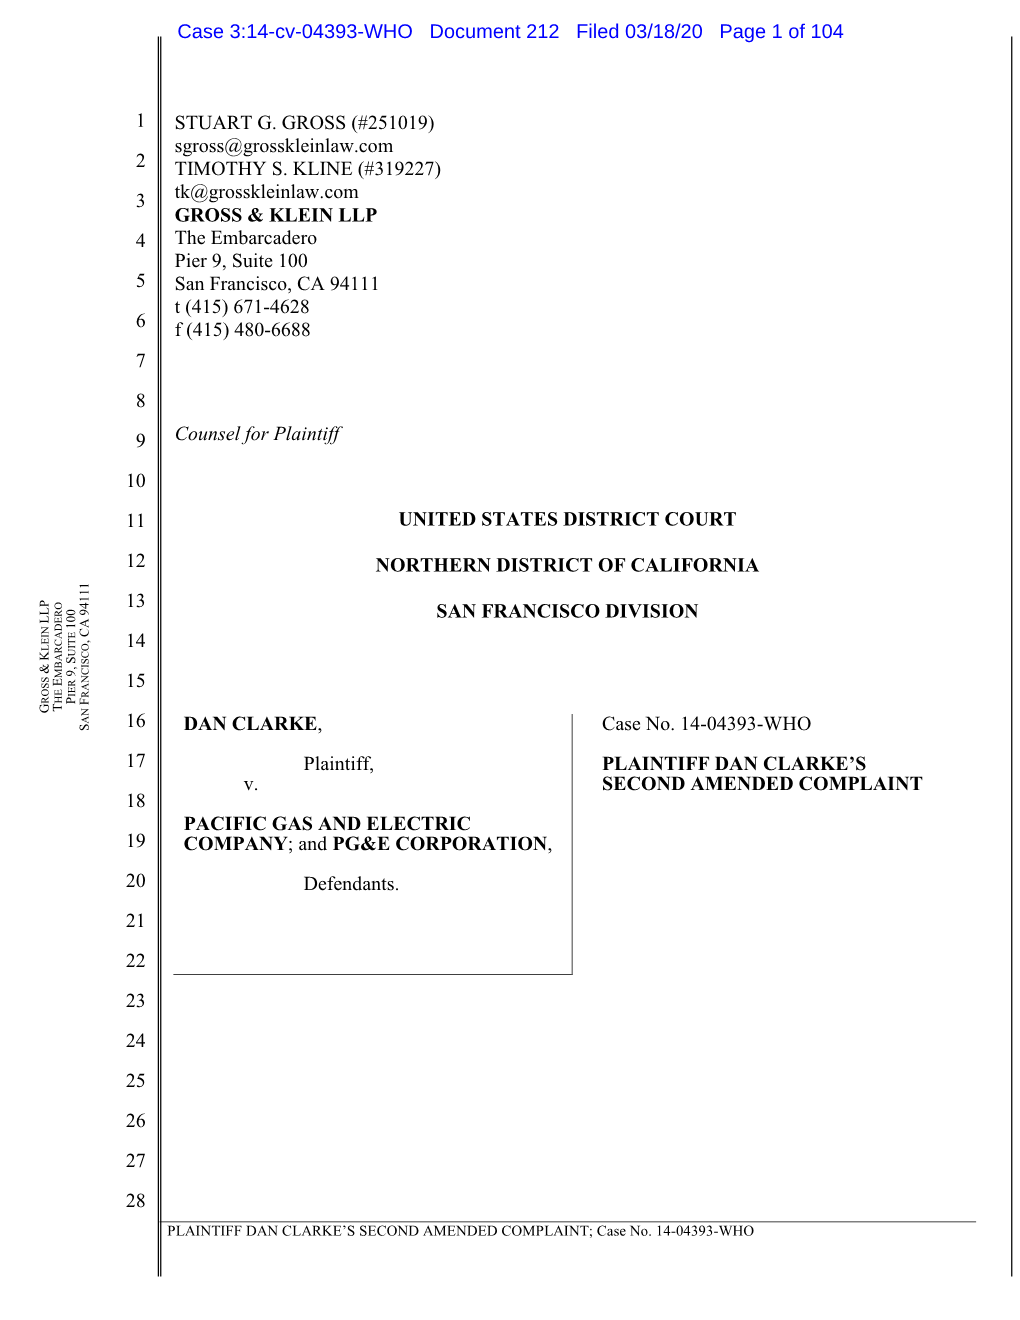 Case 3:14-Cv-04393-WHO Document 212 Filed 03/18/20 Page 1 Of